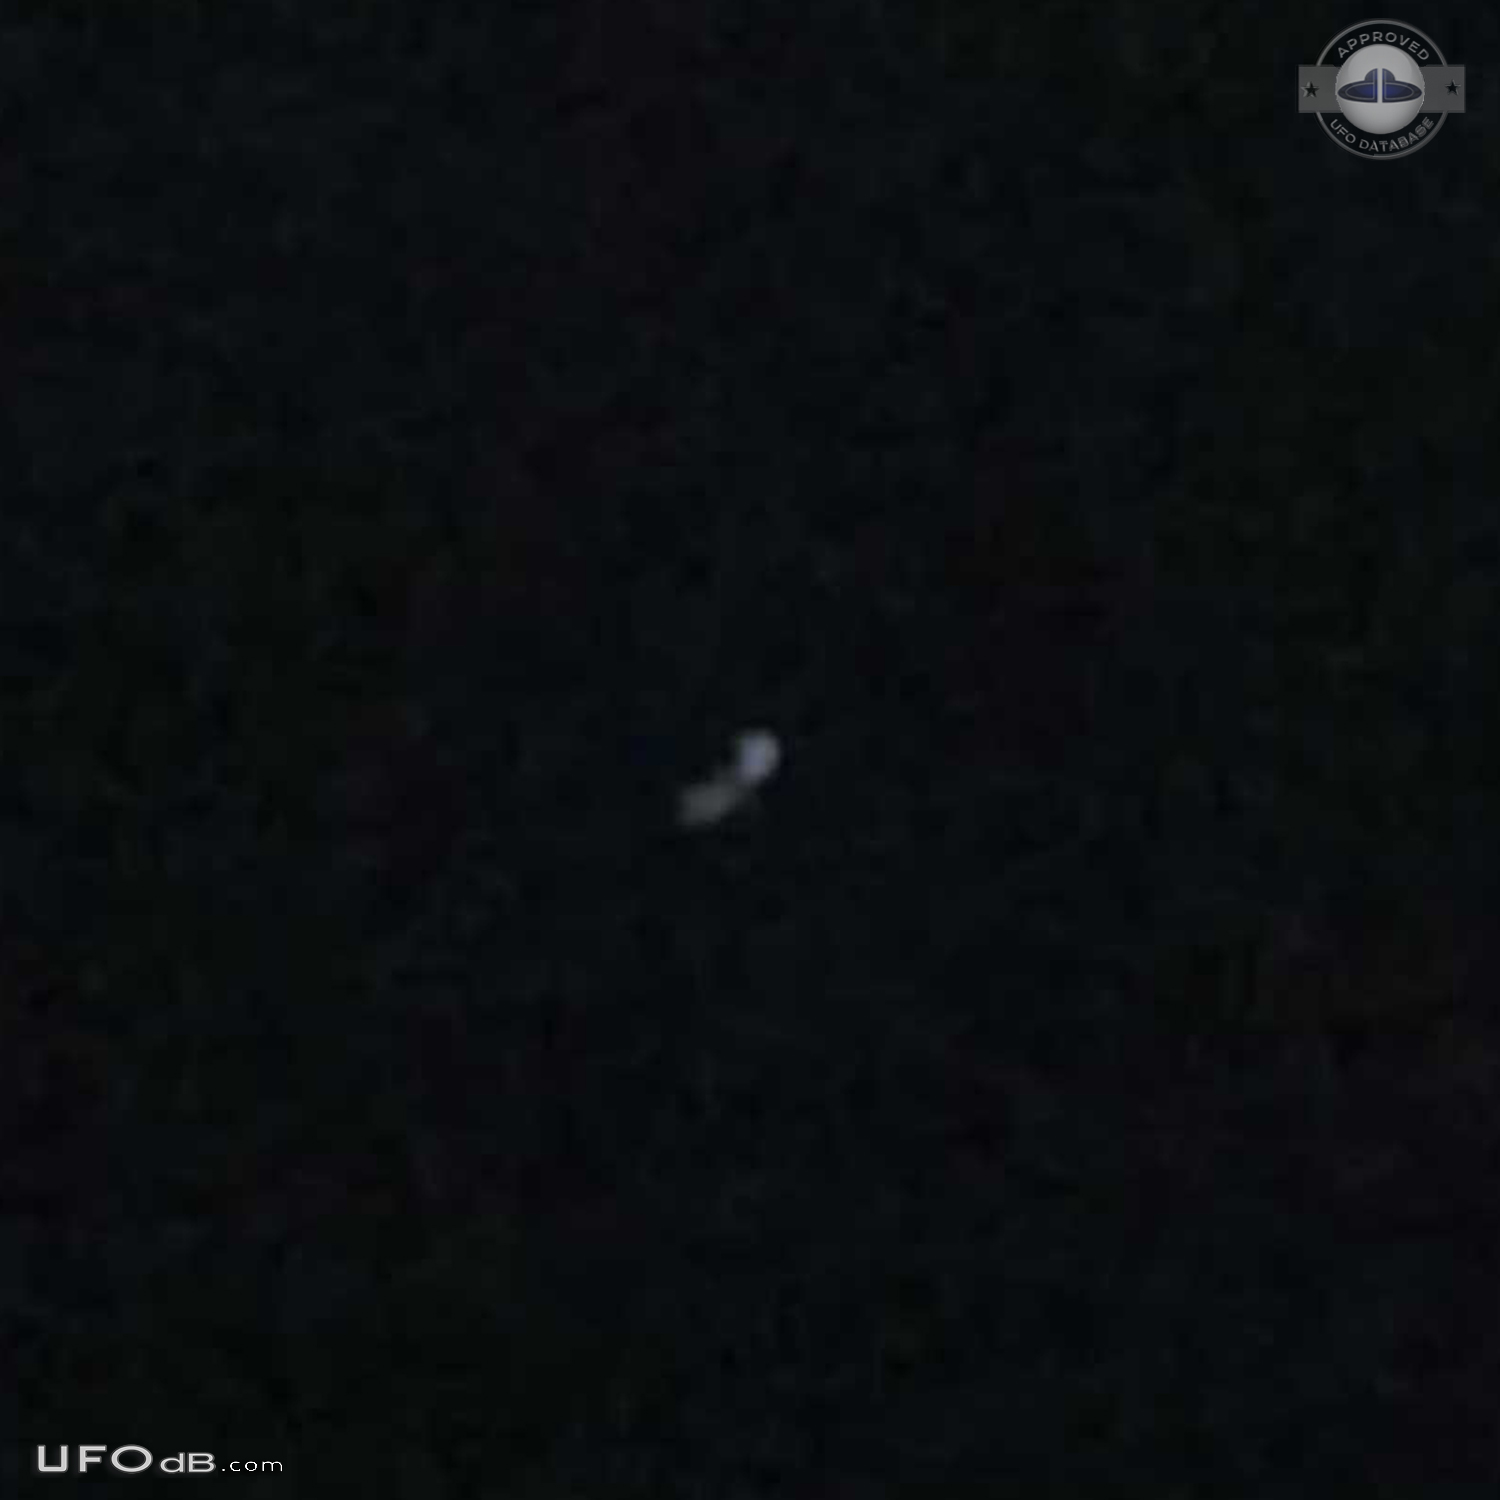 Multi week sightings of same UFO over multiple hours each night - Flor UFO Picture #775-2